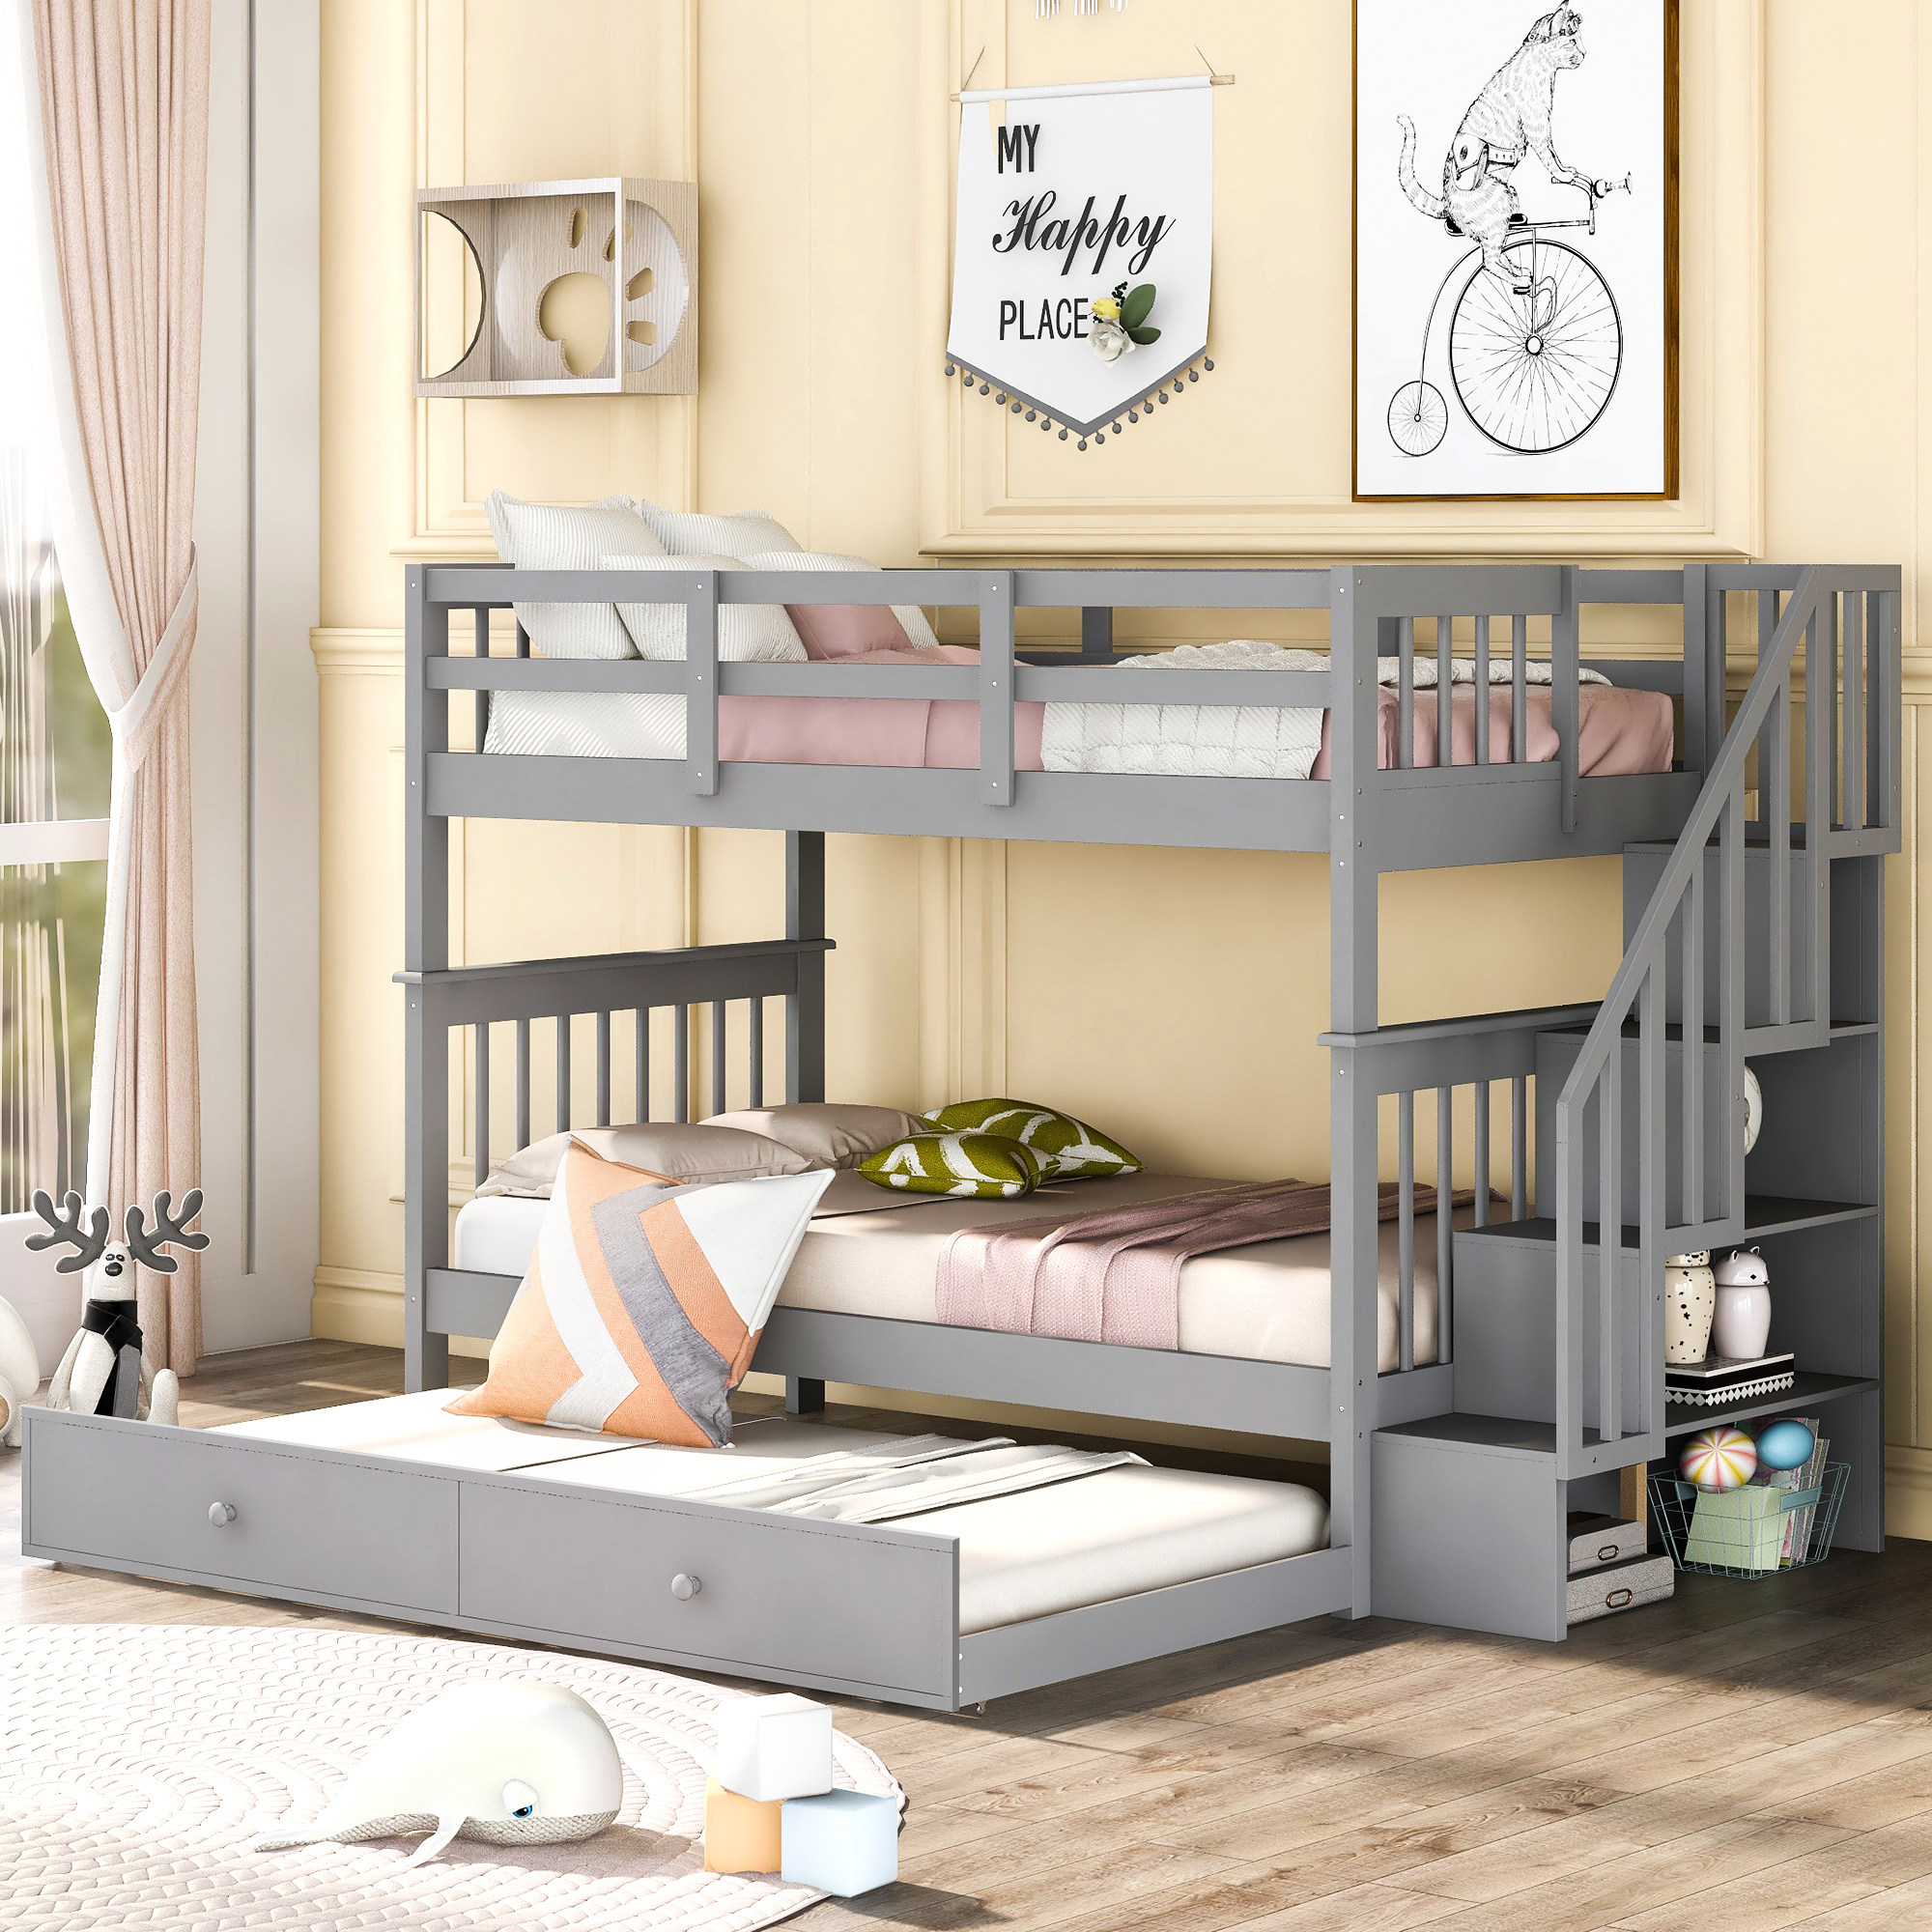 Details about   Metal Twin over Twin Bunk Beds Frame Ladder for Kids Adult Children Home White 